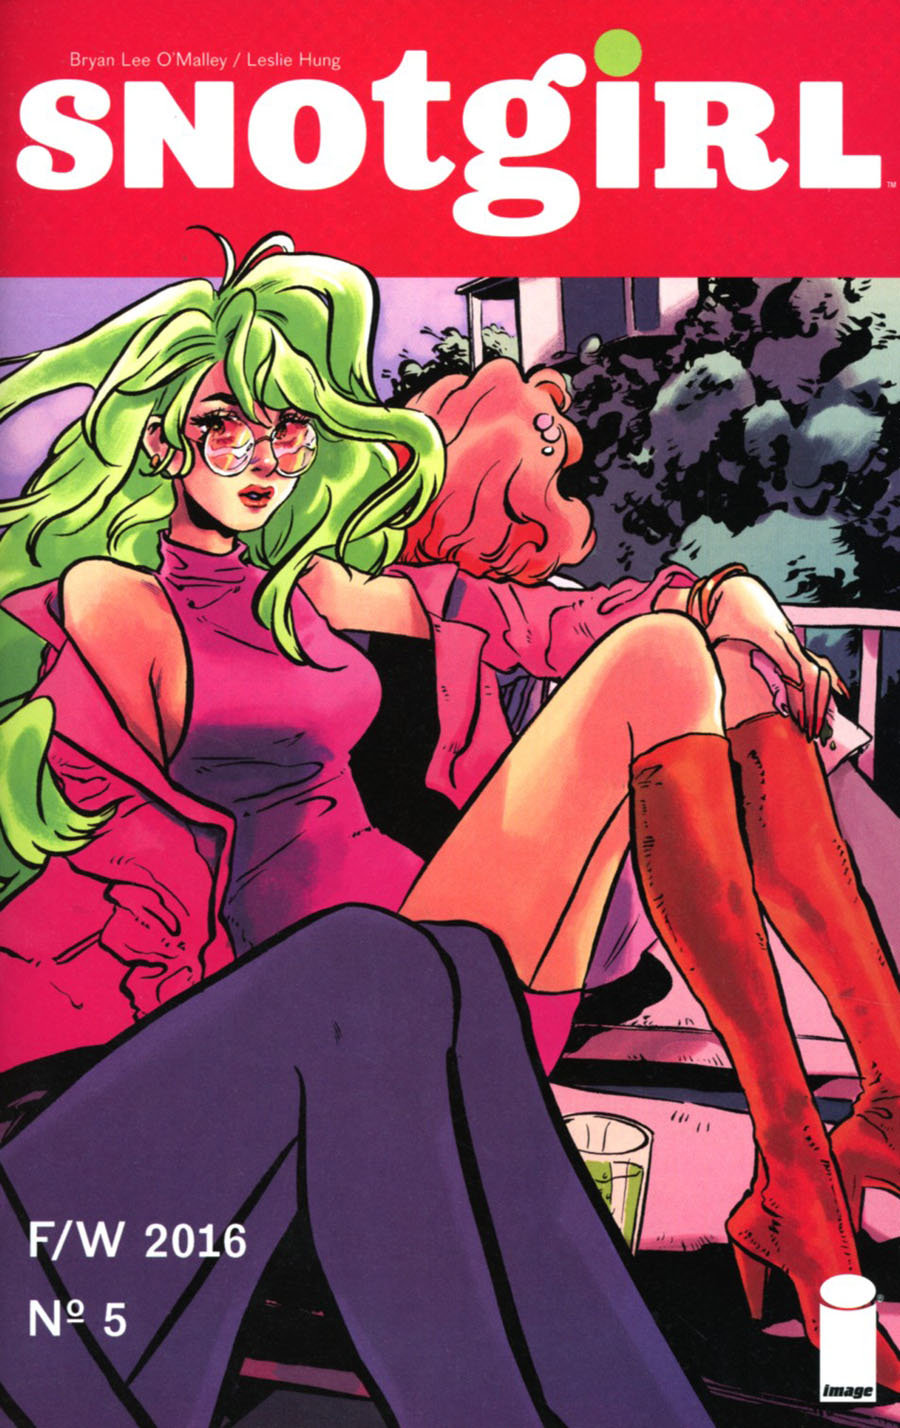 Snotgirl #5 Cover A Leslie Hung